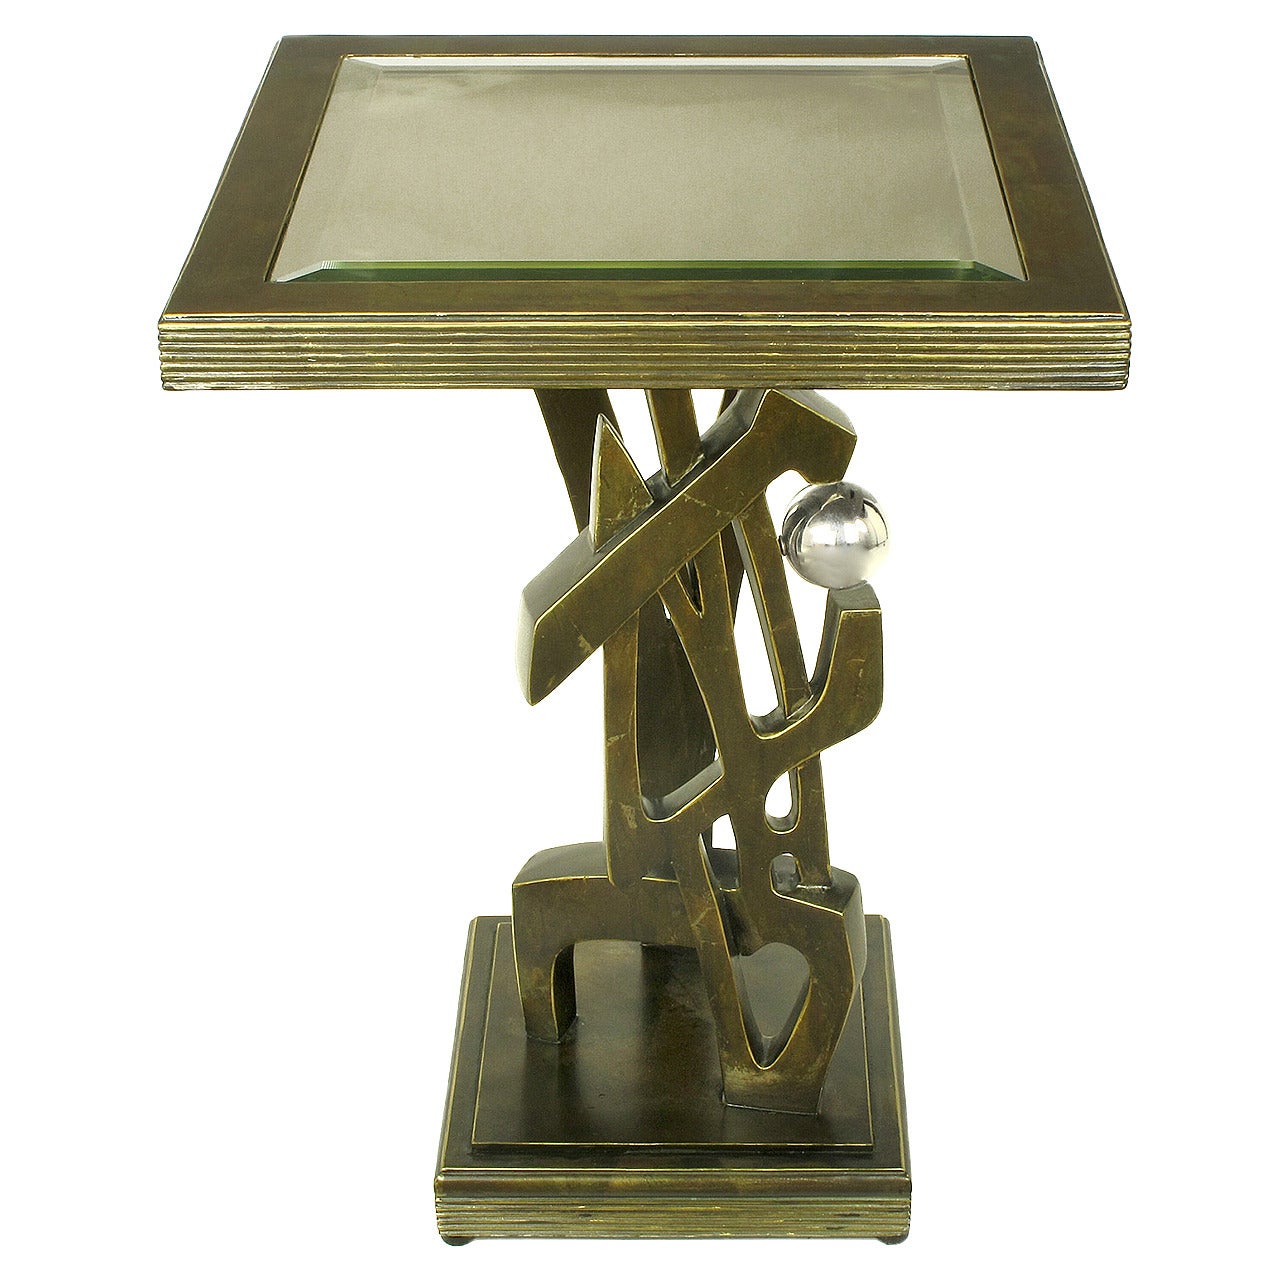 Bronzed Metal and Resin Artisan Sculpture Side Table with Chrome Ball